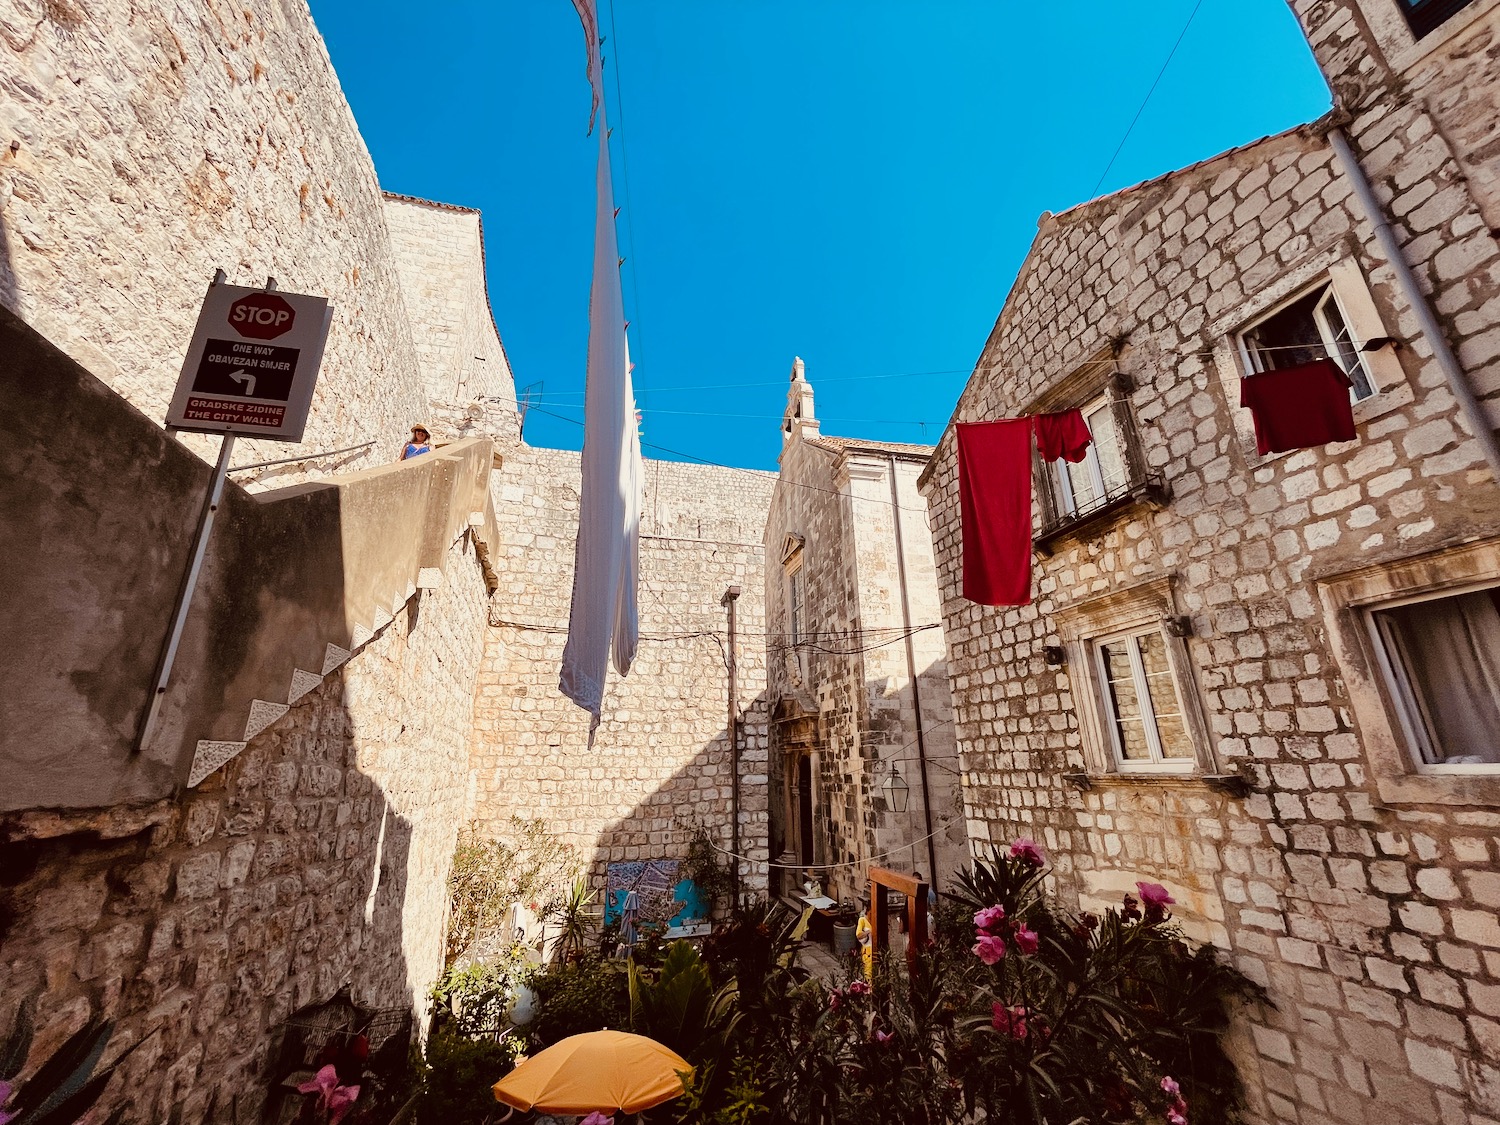 a stone buildings with laundry out of the clothesline